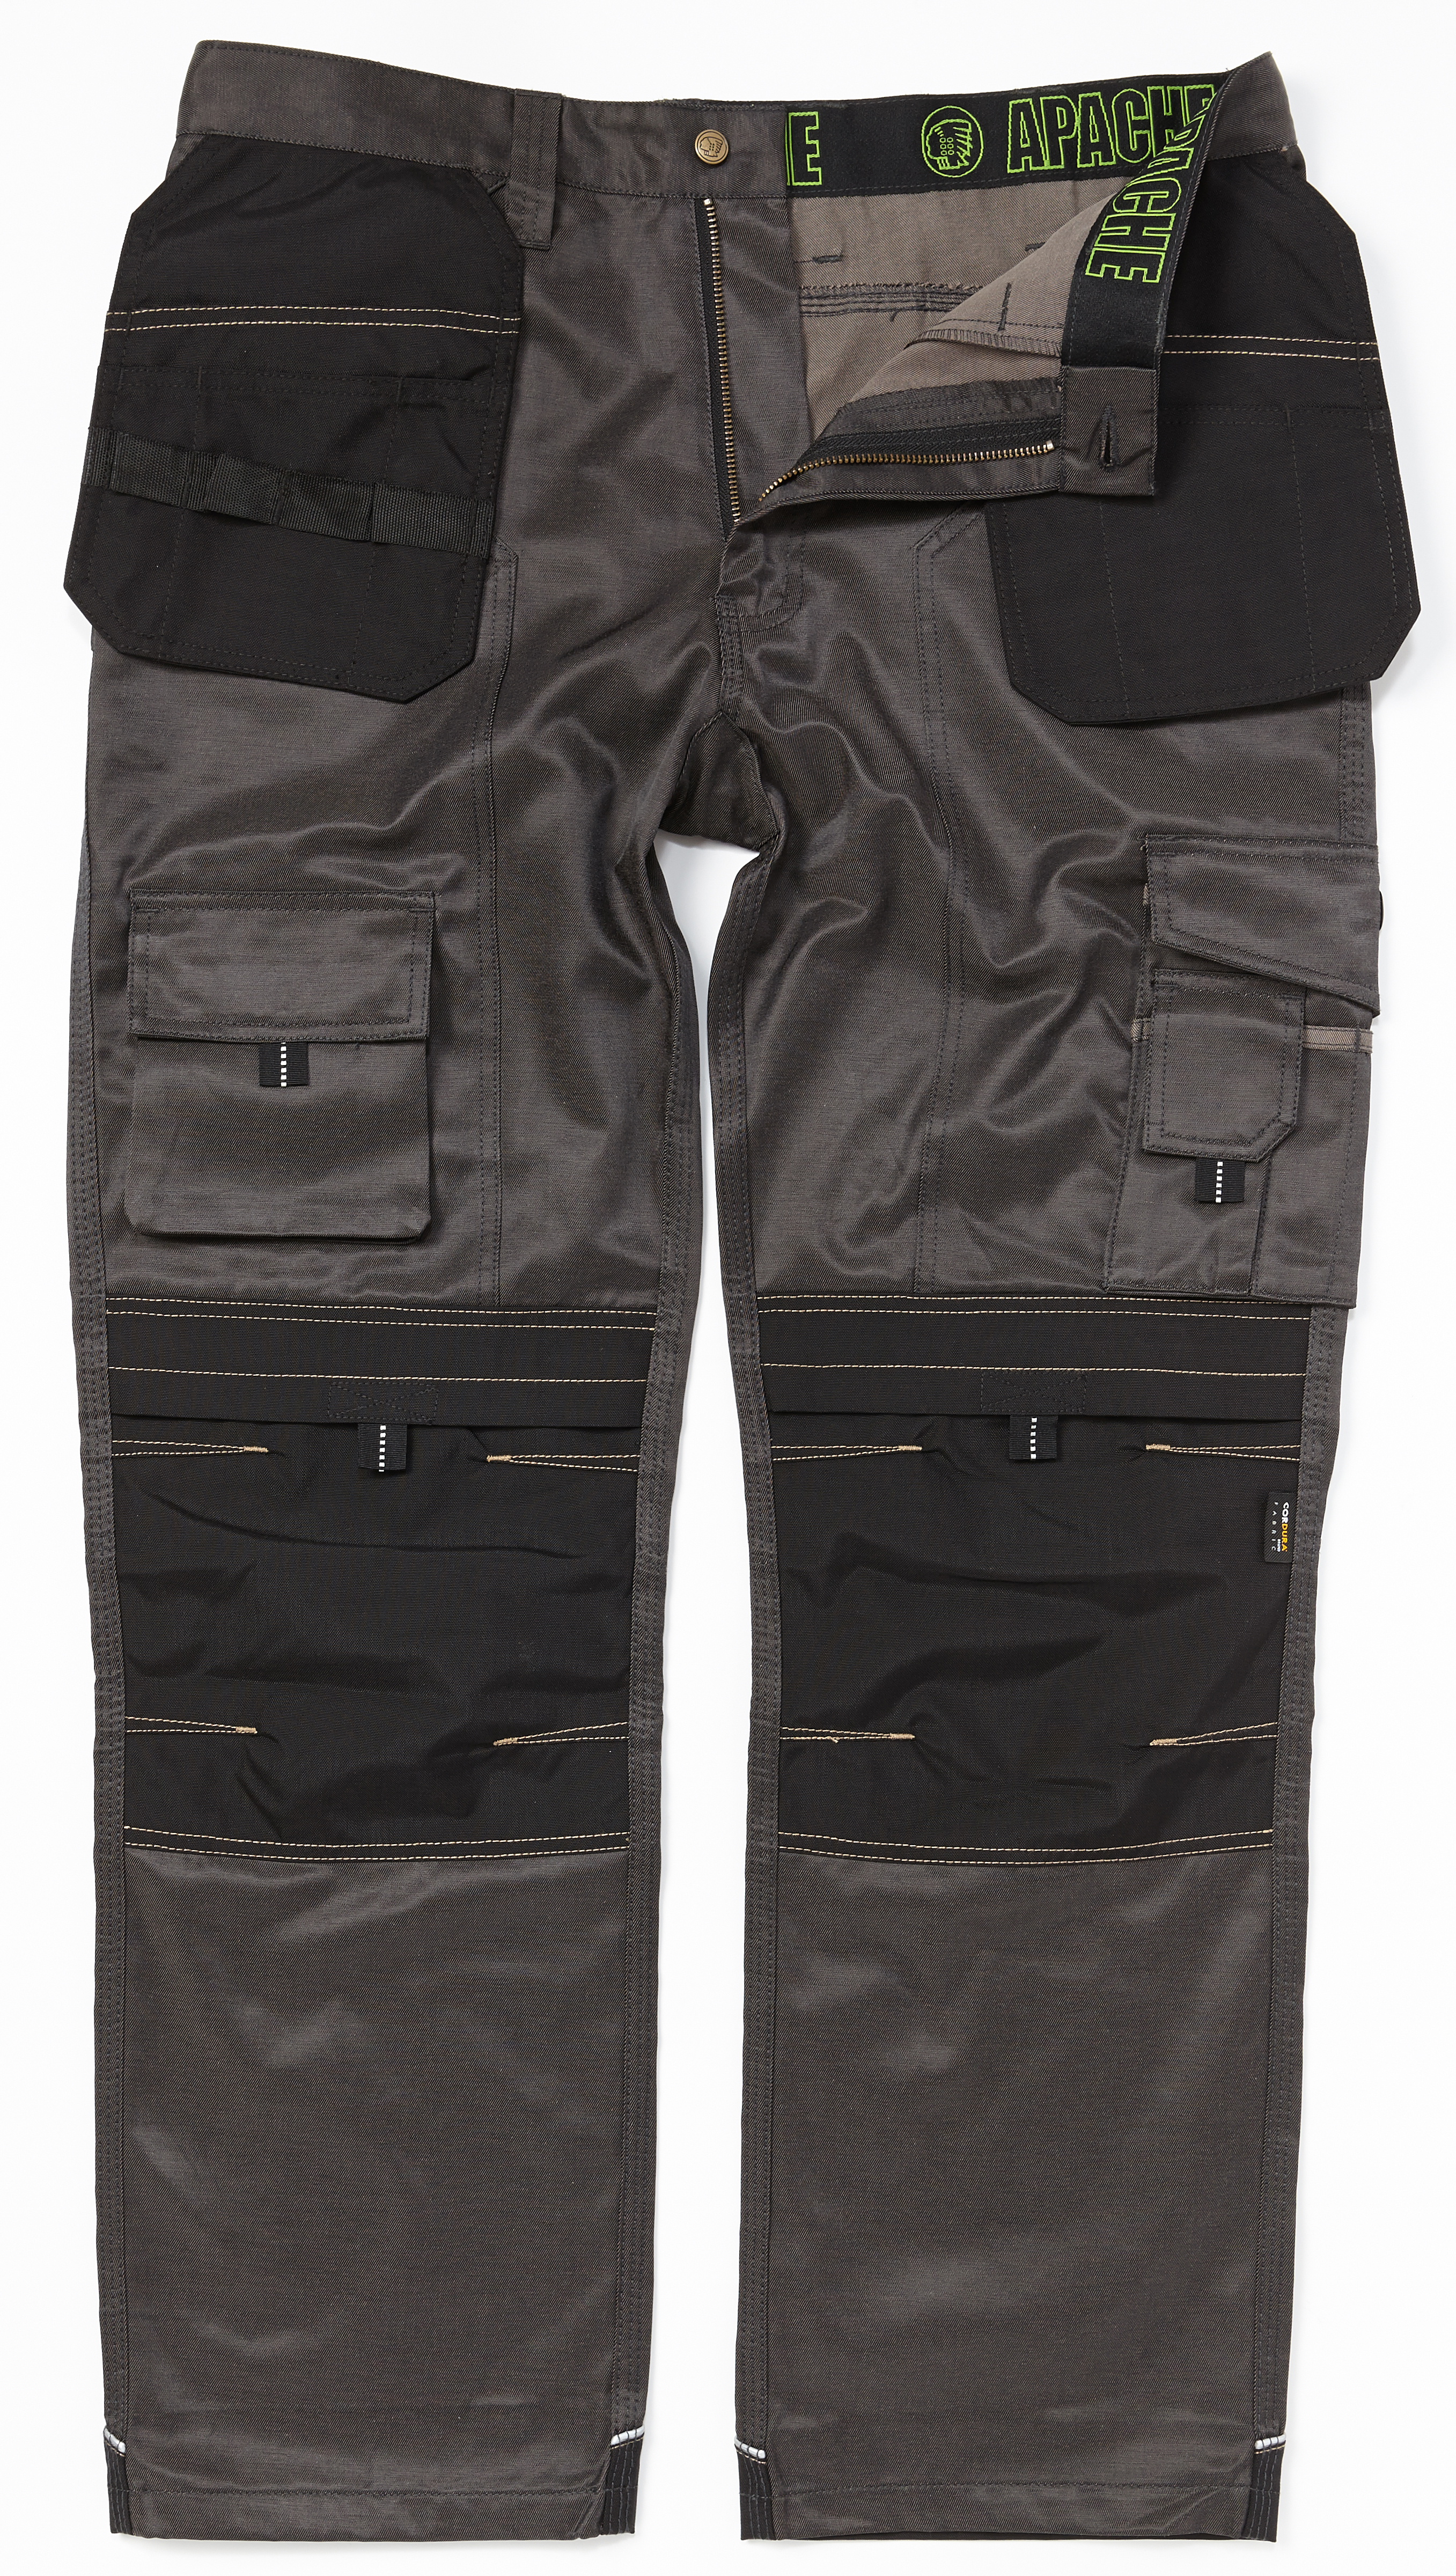 Apache Twill Grey & Black Knee Pad Holster Trousers